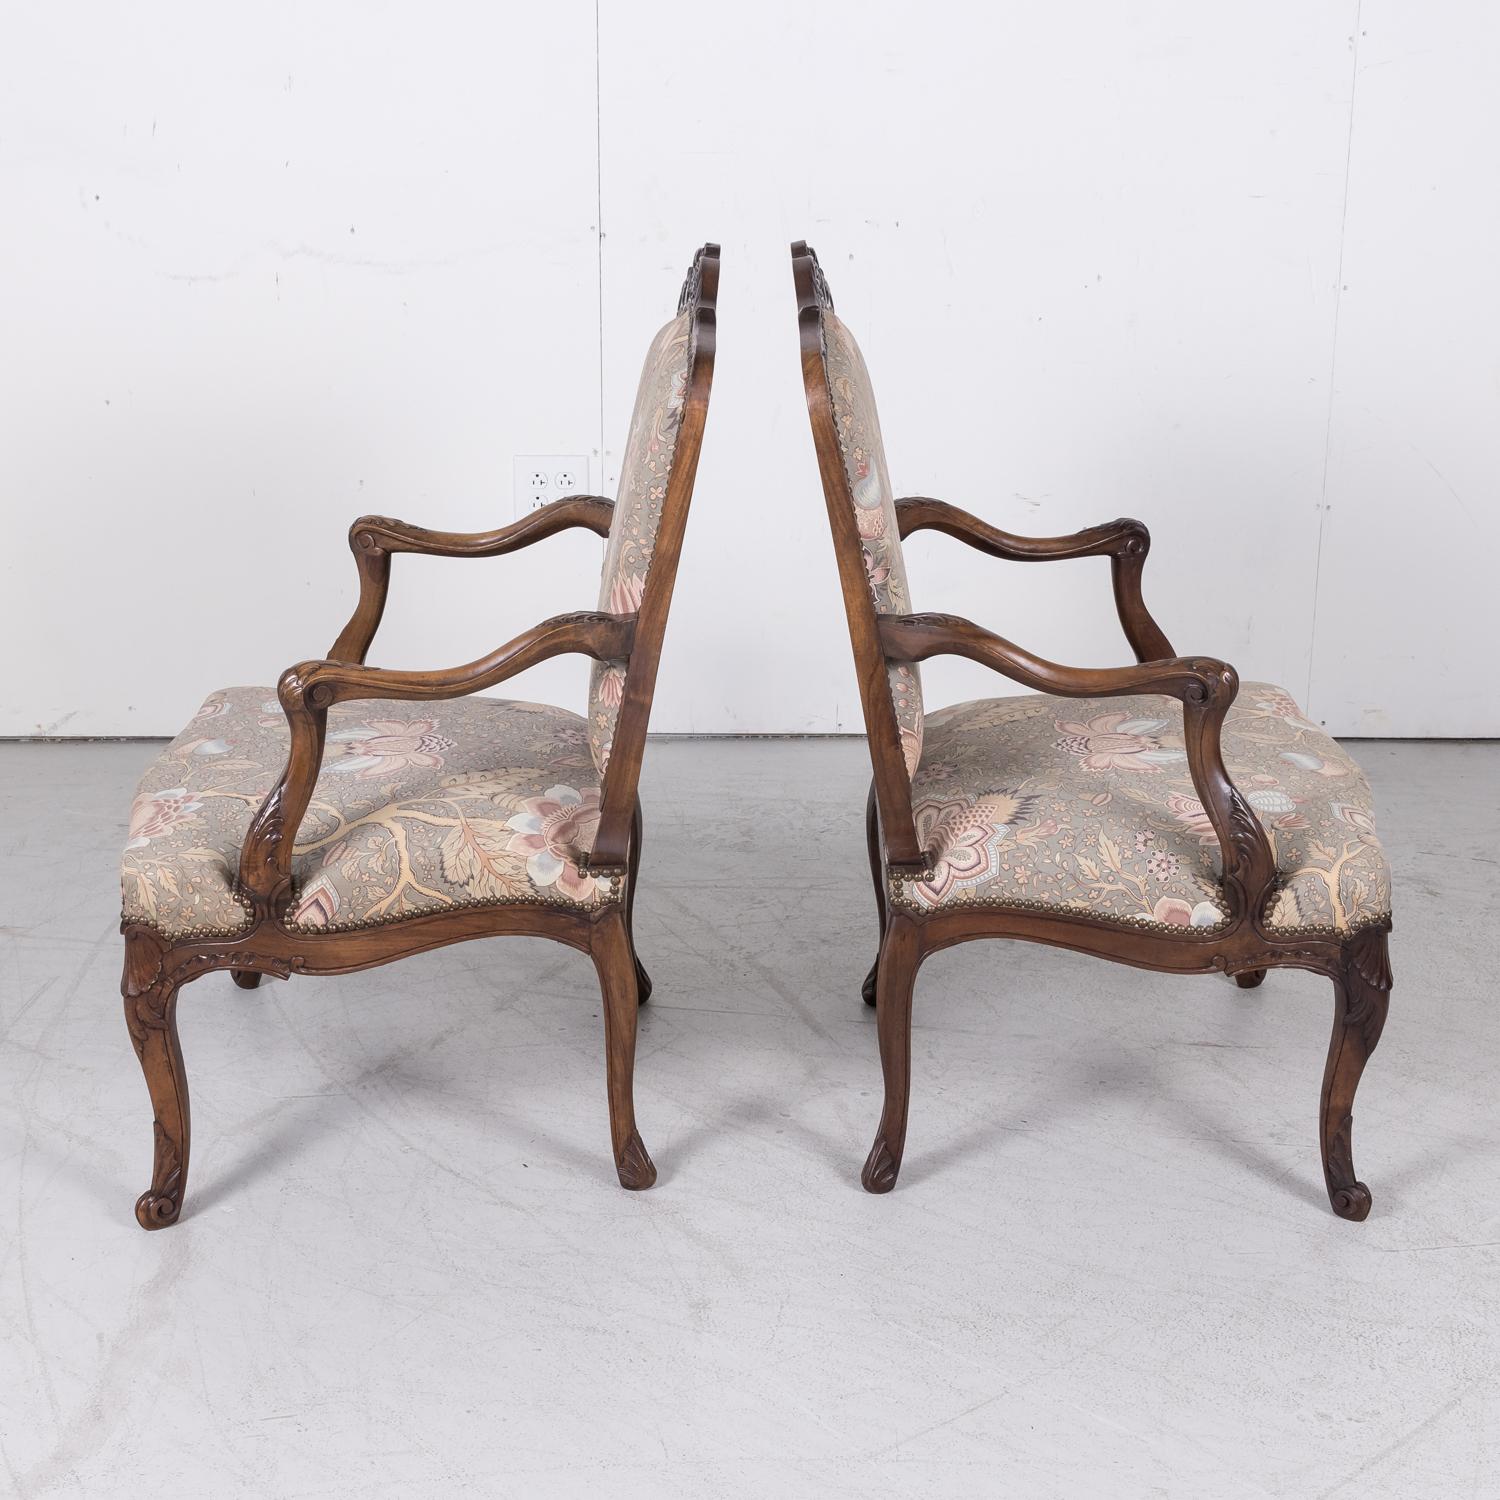 Fine Pair of 18th Century French Louis XV Period Carved Walnut Fauteuils For Sale 10